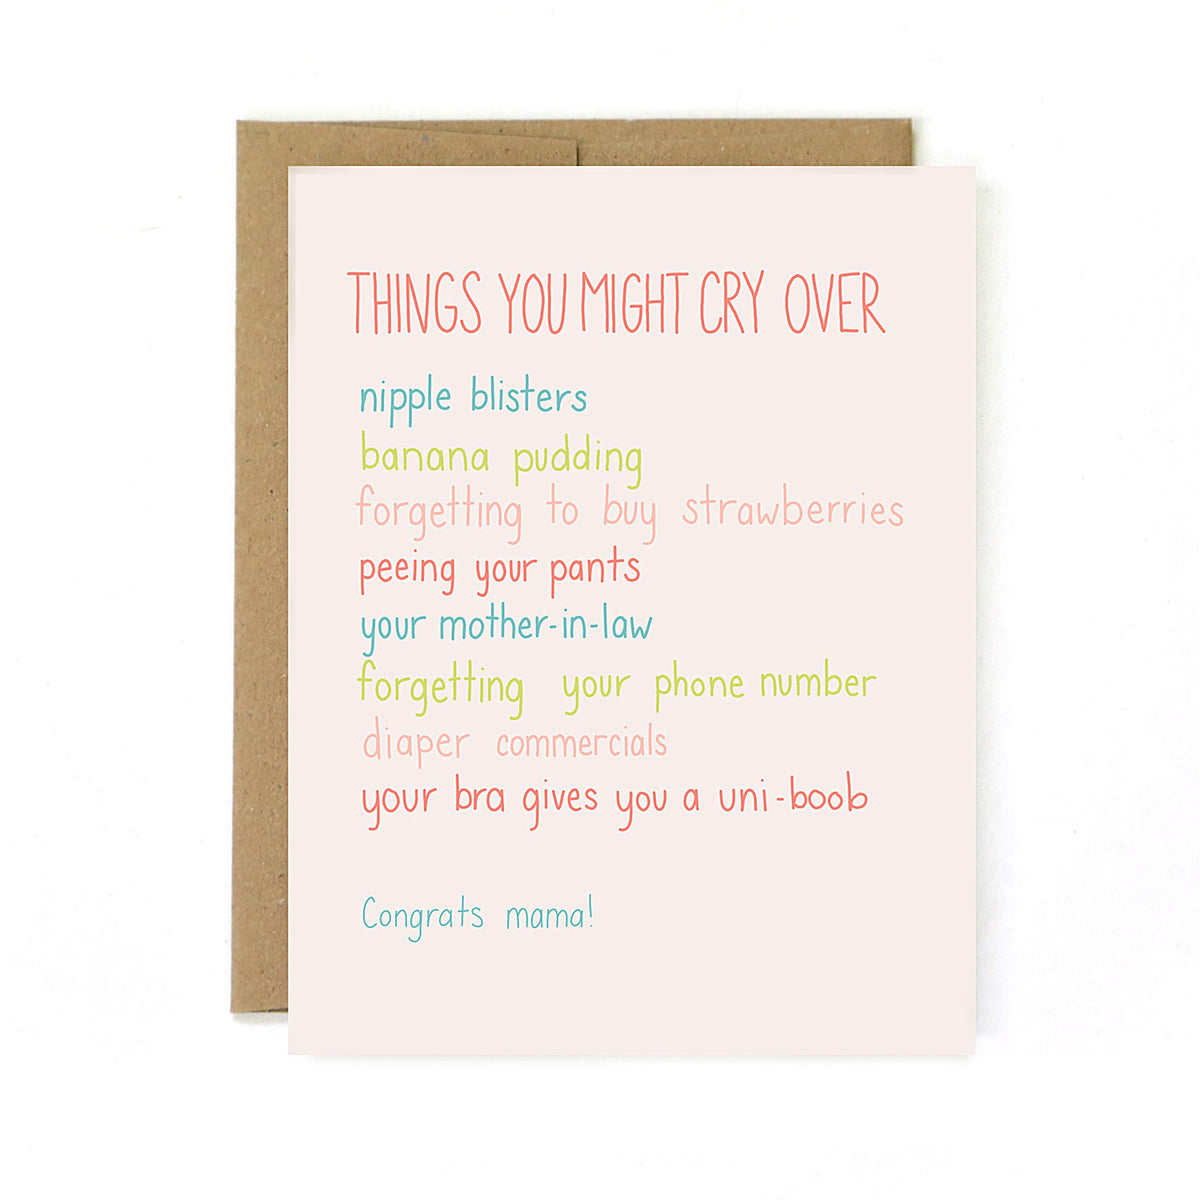 Greeting card with rainbow colored message that reads Things you might cry over: nipple blisters, banana pudding, forgetting to buy strawberries, peeing your pants, your mother-in-law, forgetting your phone number, diaper commercials, your bra gives you a uni-boob. Congrats mama!